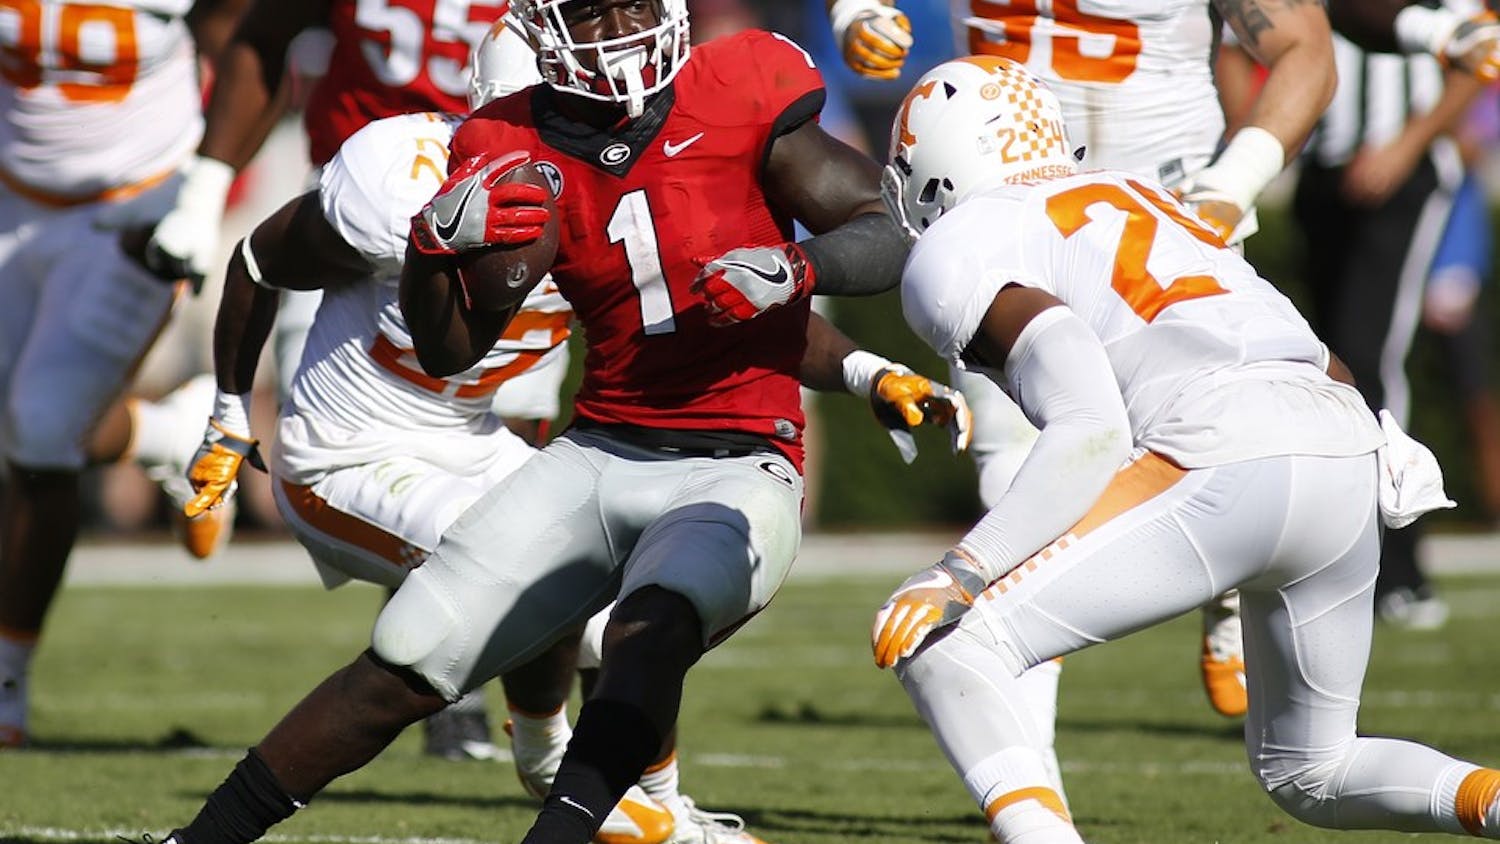 Georgia tailback Sony Michel (1) jukes to avoid a tackle from Tennessee defensive back Todd Kelly Jr. (24) during the first half of a NCAA college football game between Georgia and Tennessee, in Athens, Ga., on Saturday, October 1, 2016. (Joshua L. Jones/special)